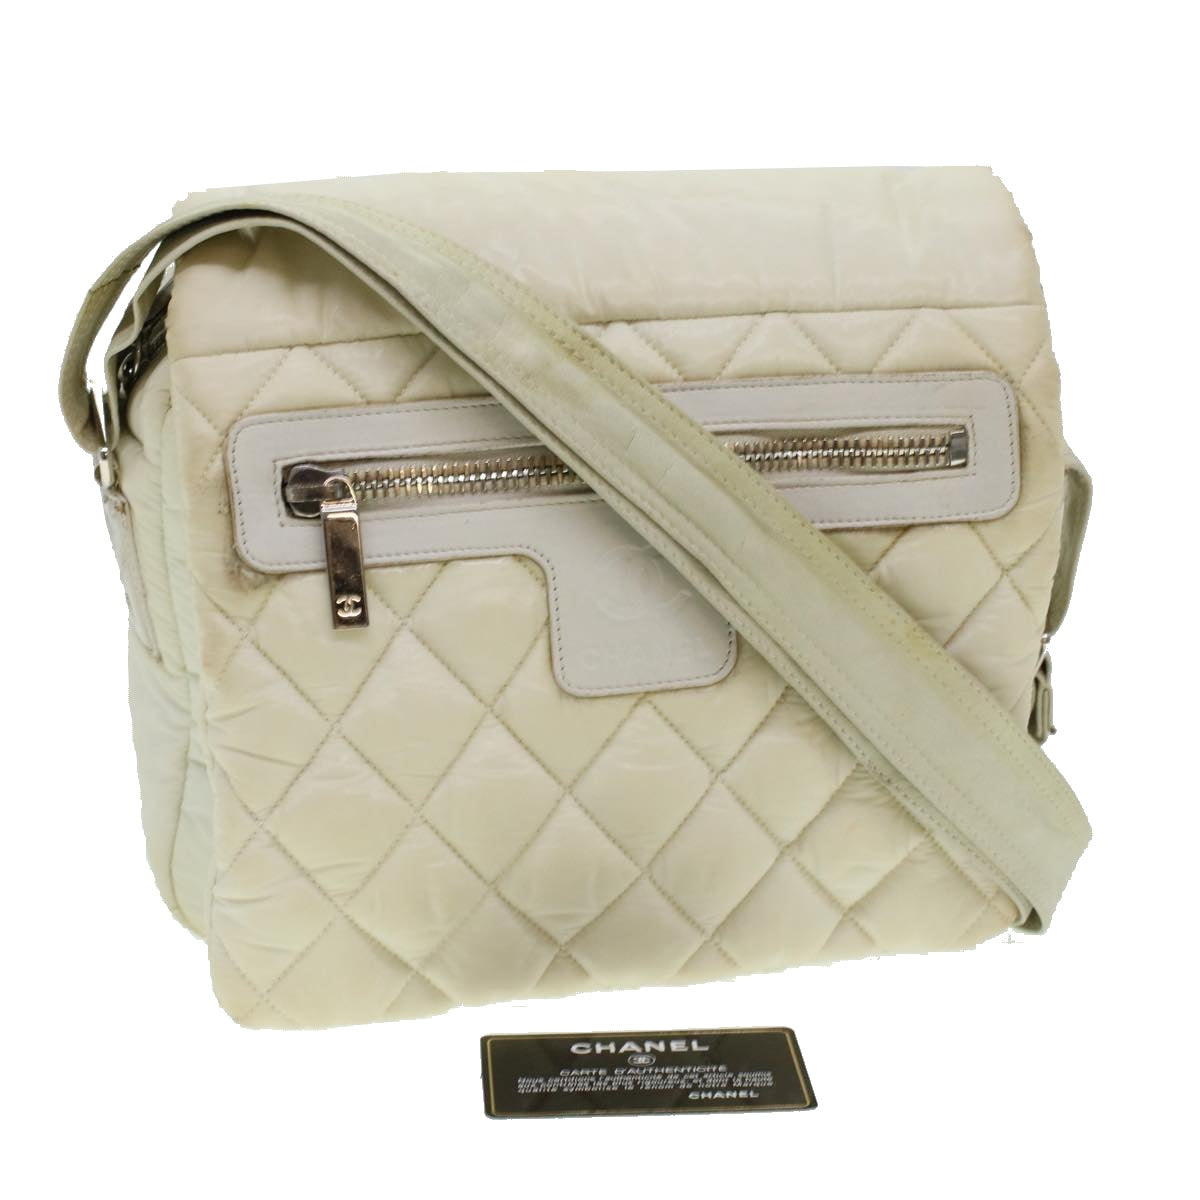 CHANEL Matelasse Shoulder Bag Patent leather White CC Auth bs5109